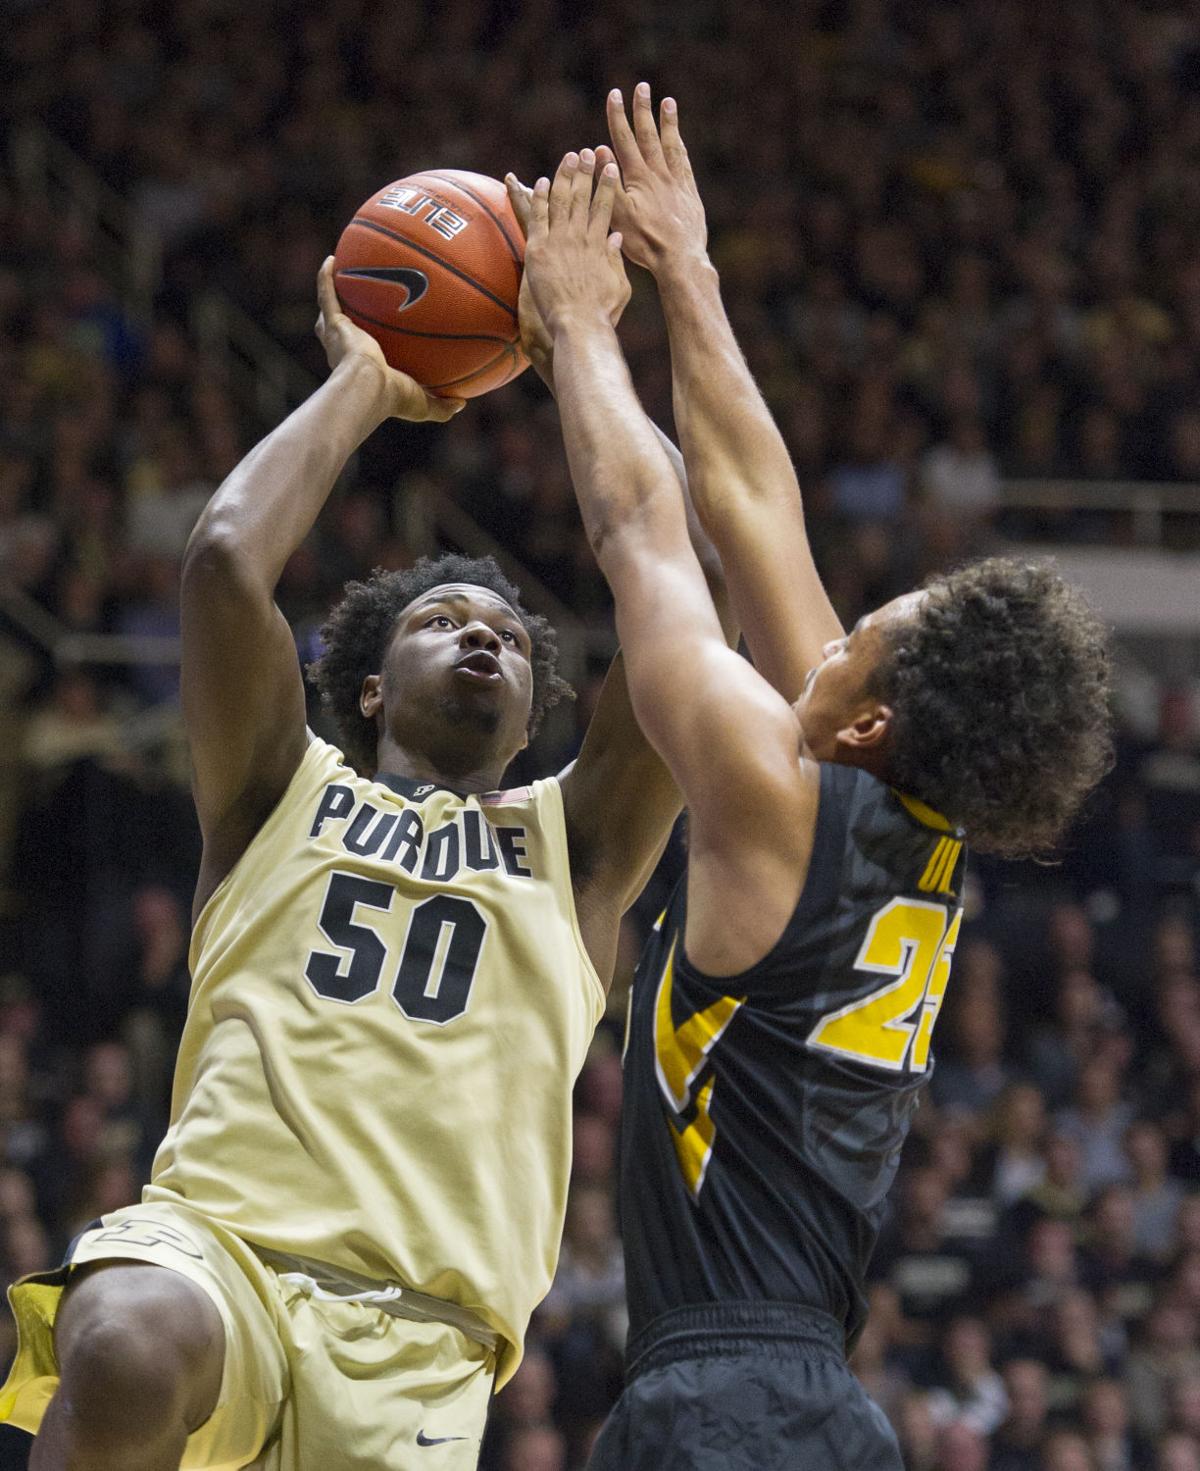 Cook faces tough matchup in return for Hawkeyes | Basketball | wcfcourier.com1200 x 1471